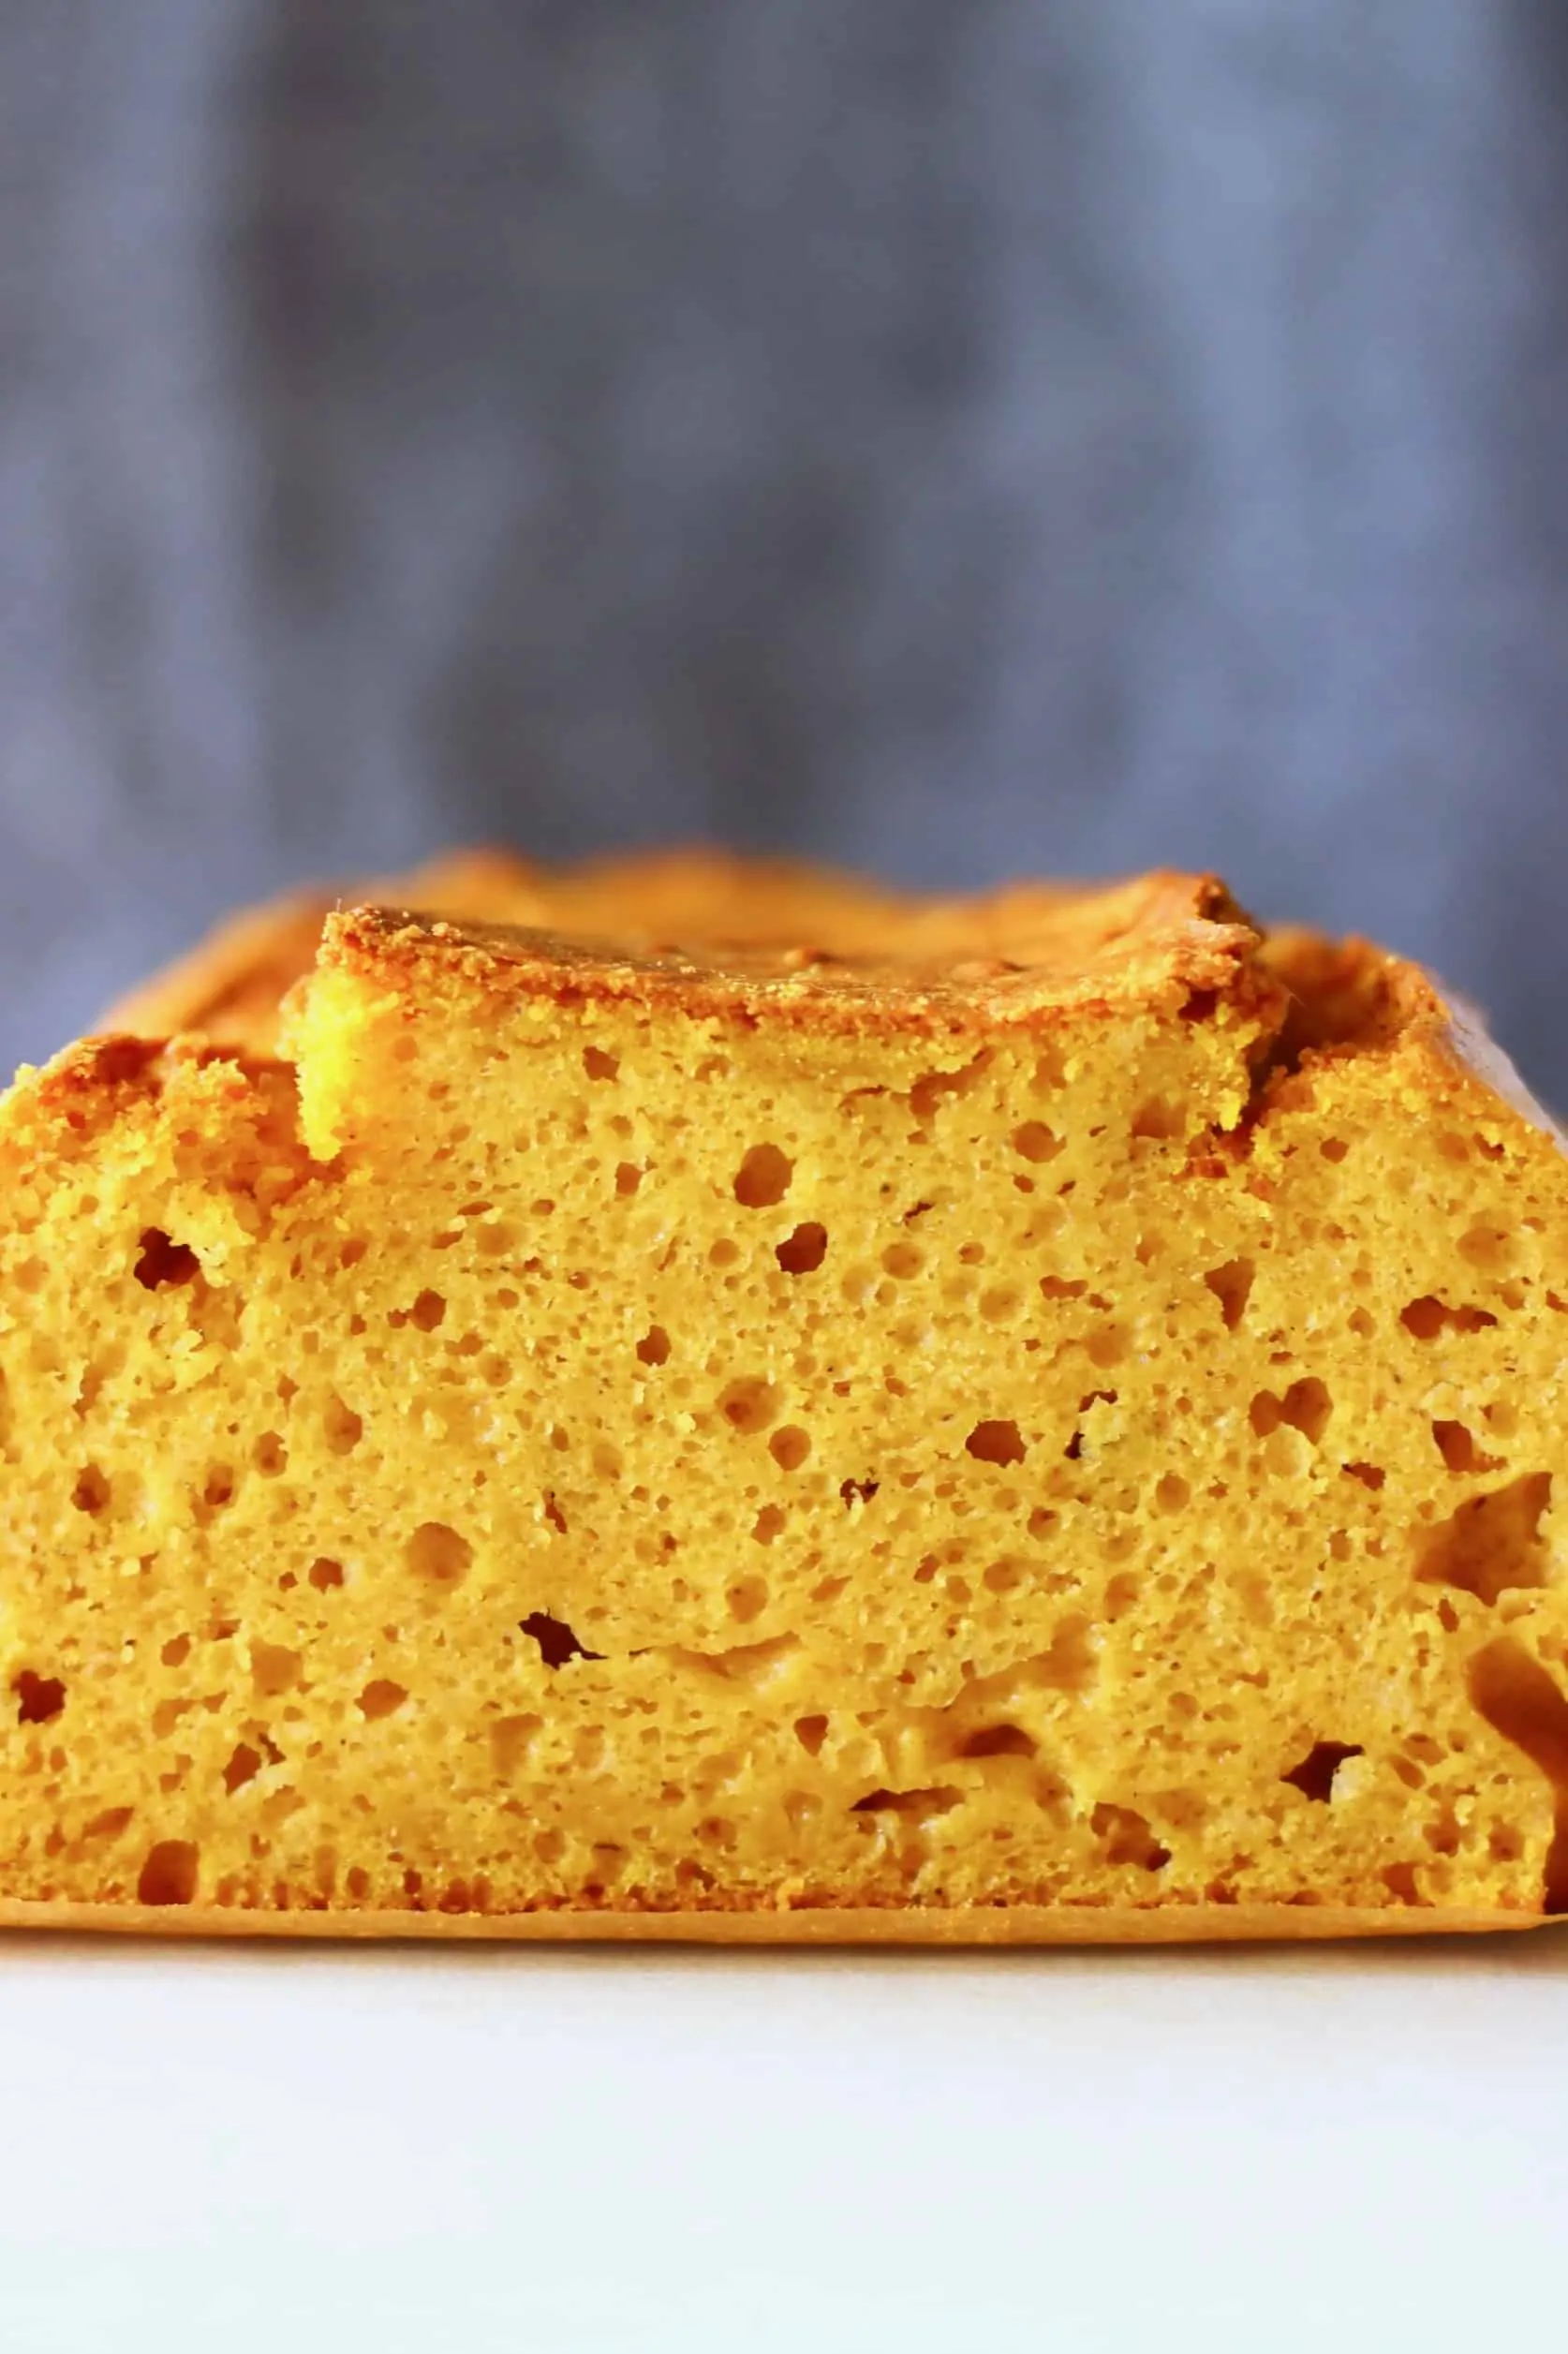 A loaf of pumpkin bread against a grey background